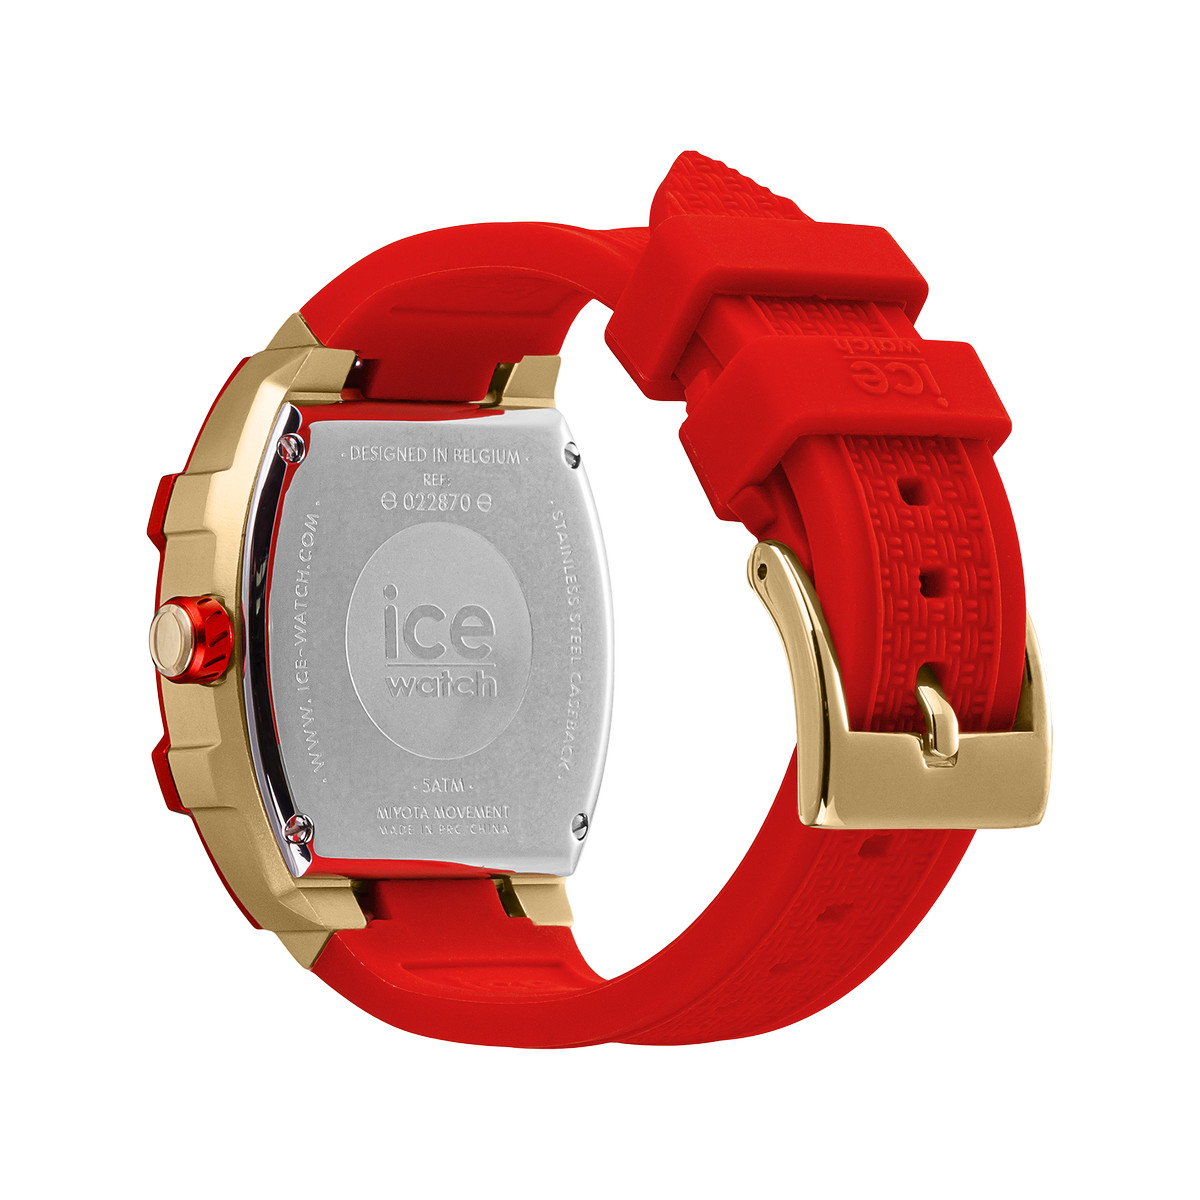 Montre ICE WATCH Ice boliday femme bracelet silicone rouge - vue 3